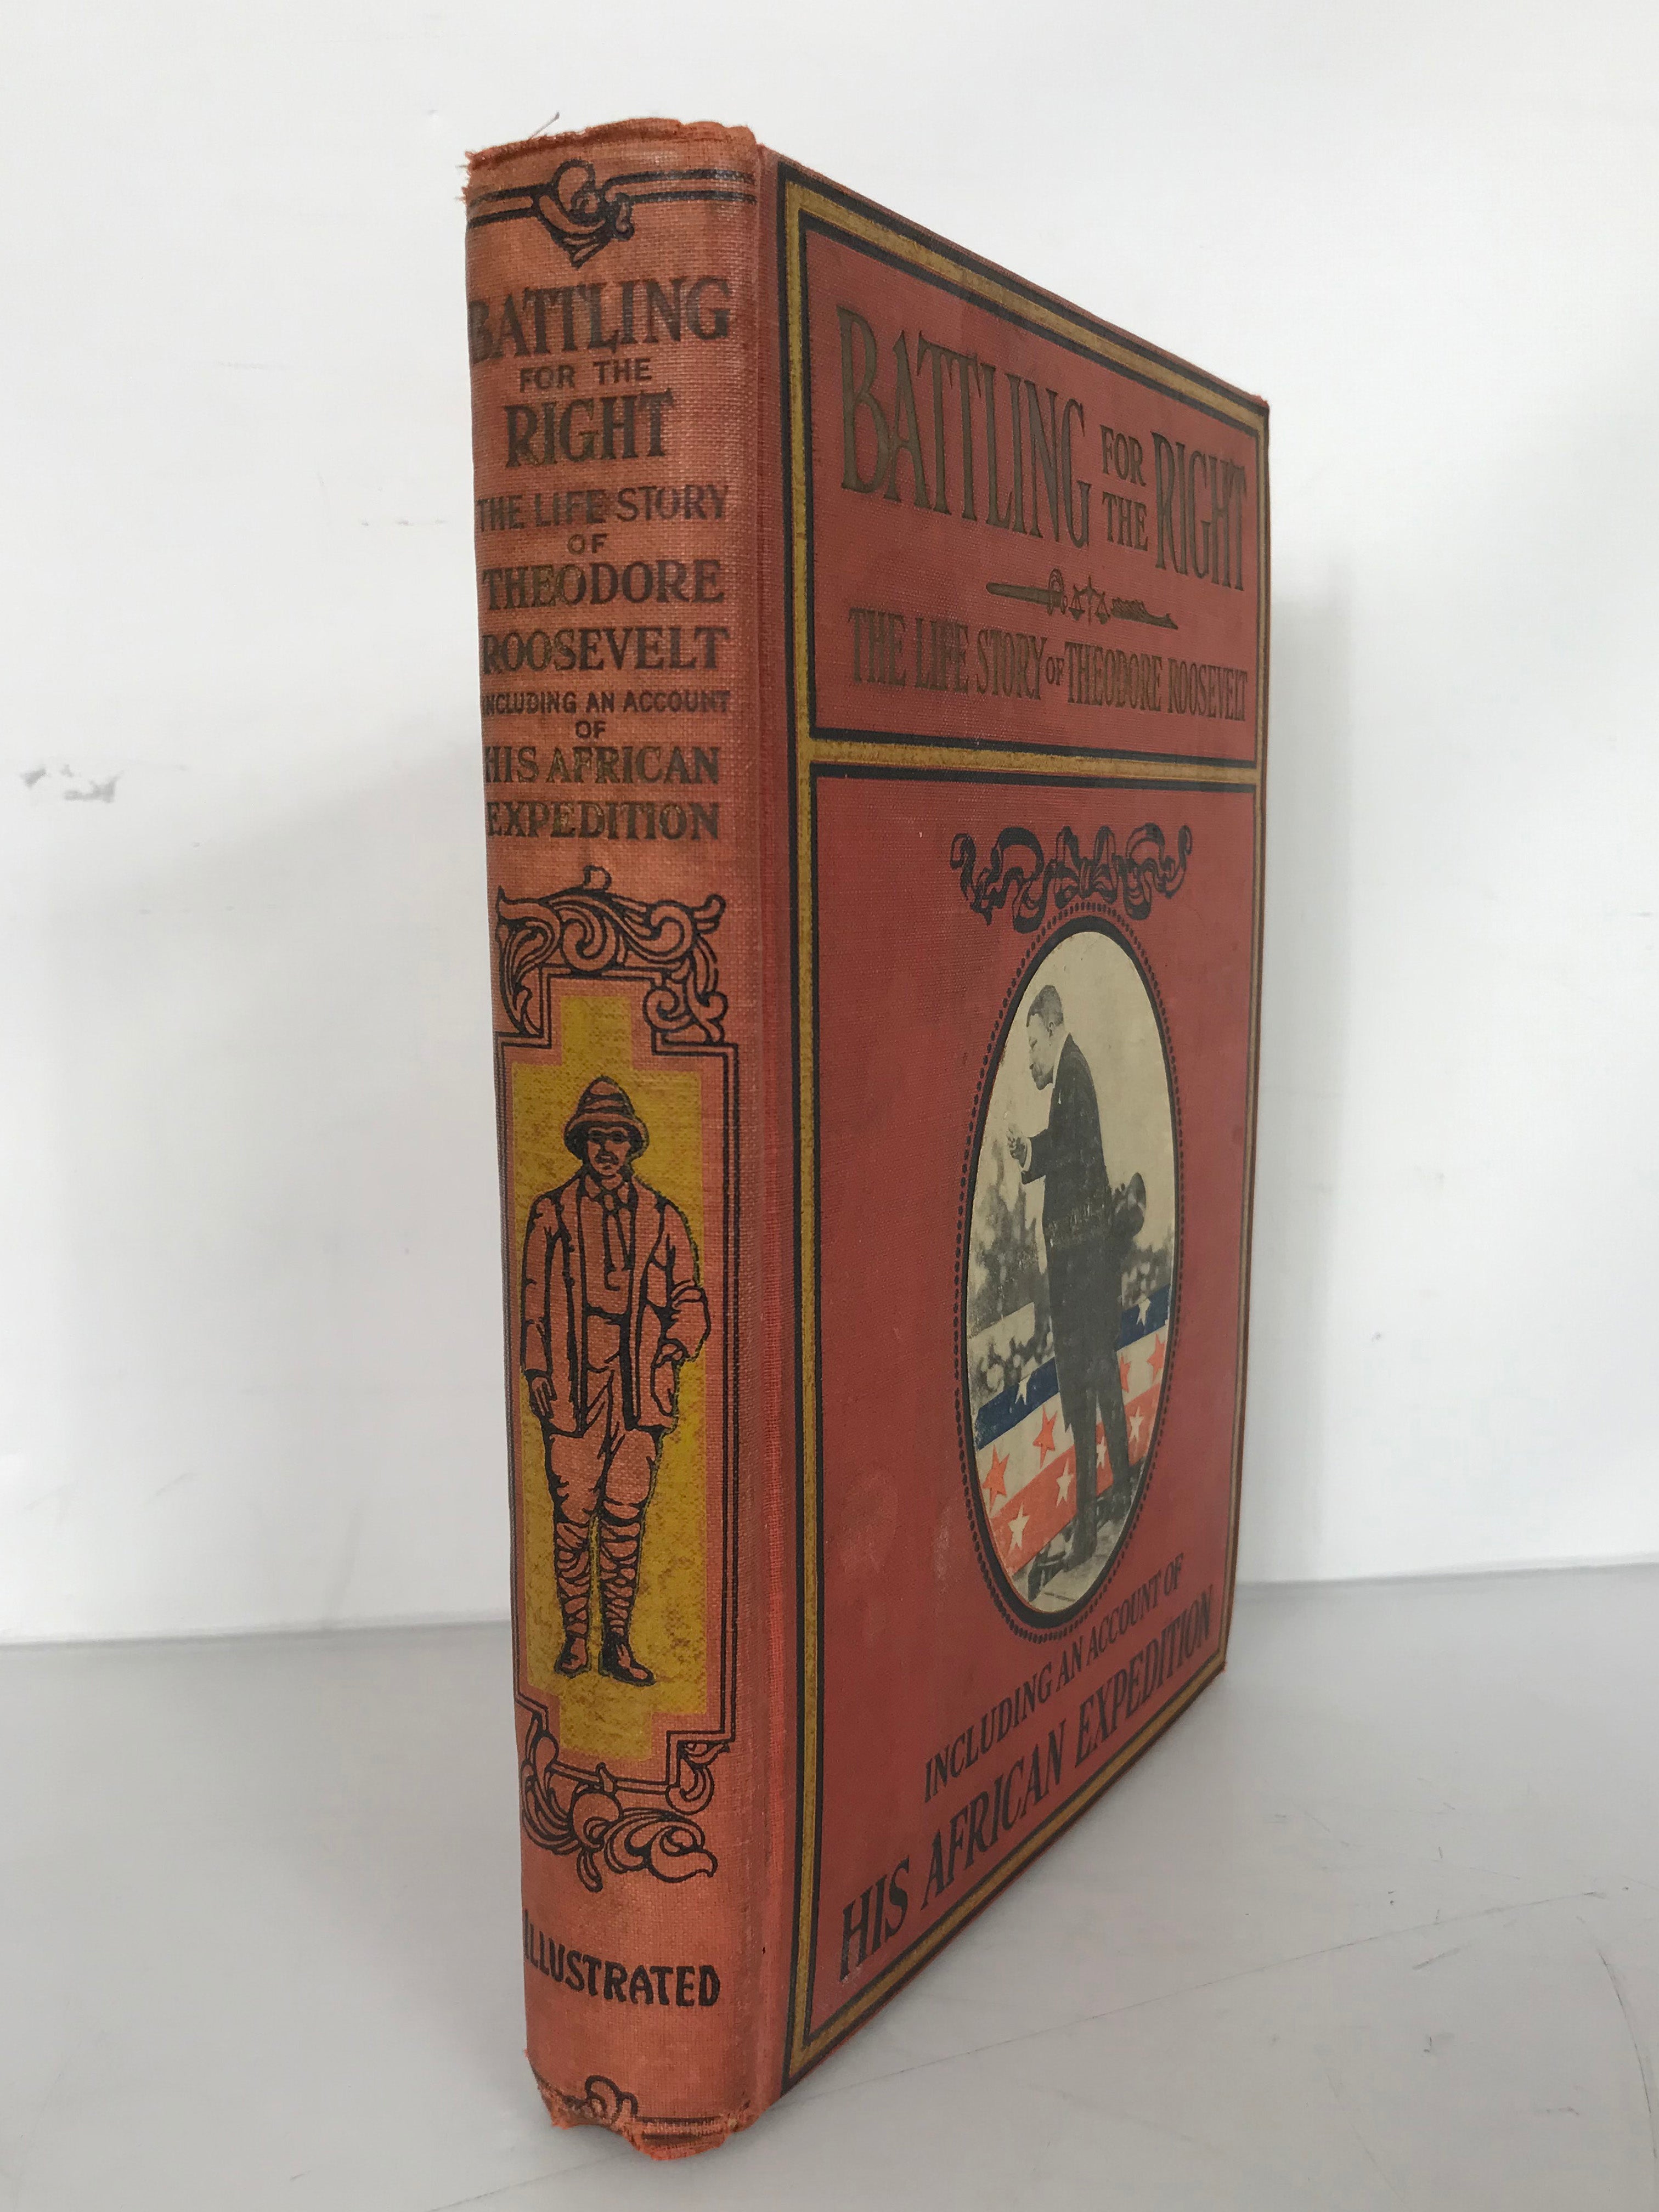 Battling for the Right The Life Story of Theodore Roosevelt 1910